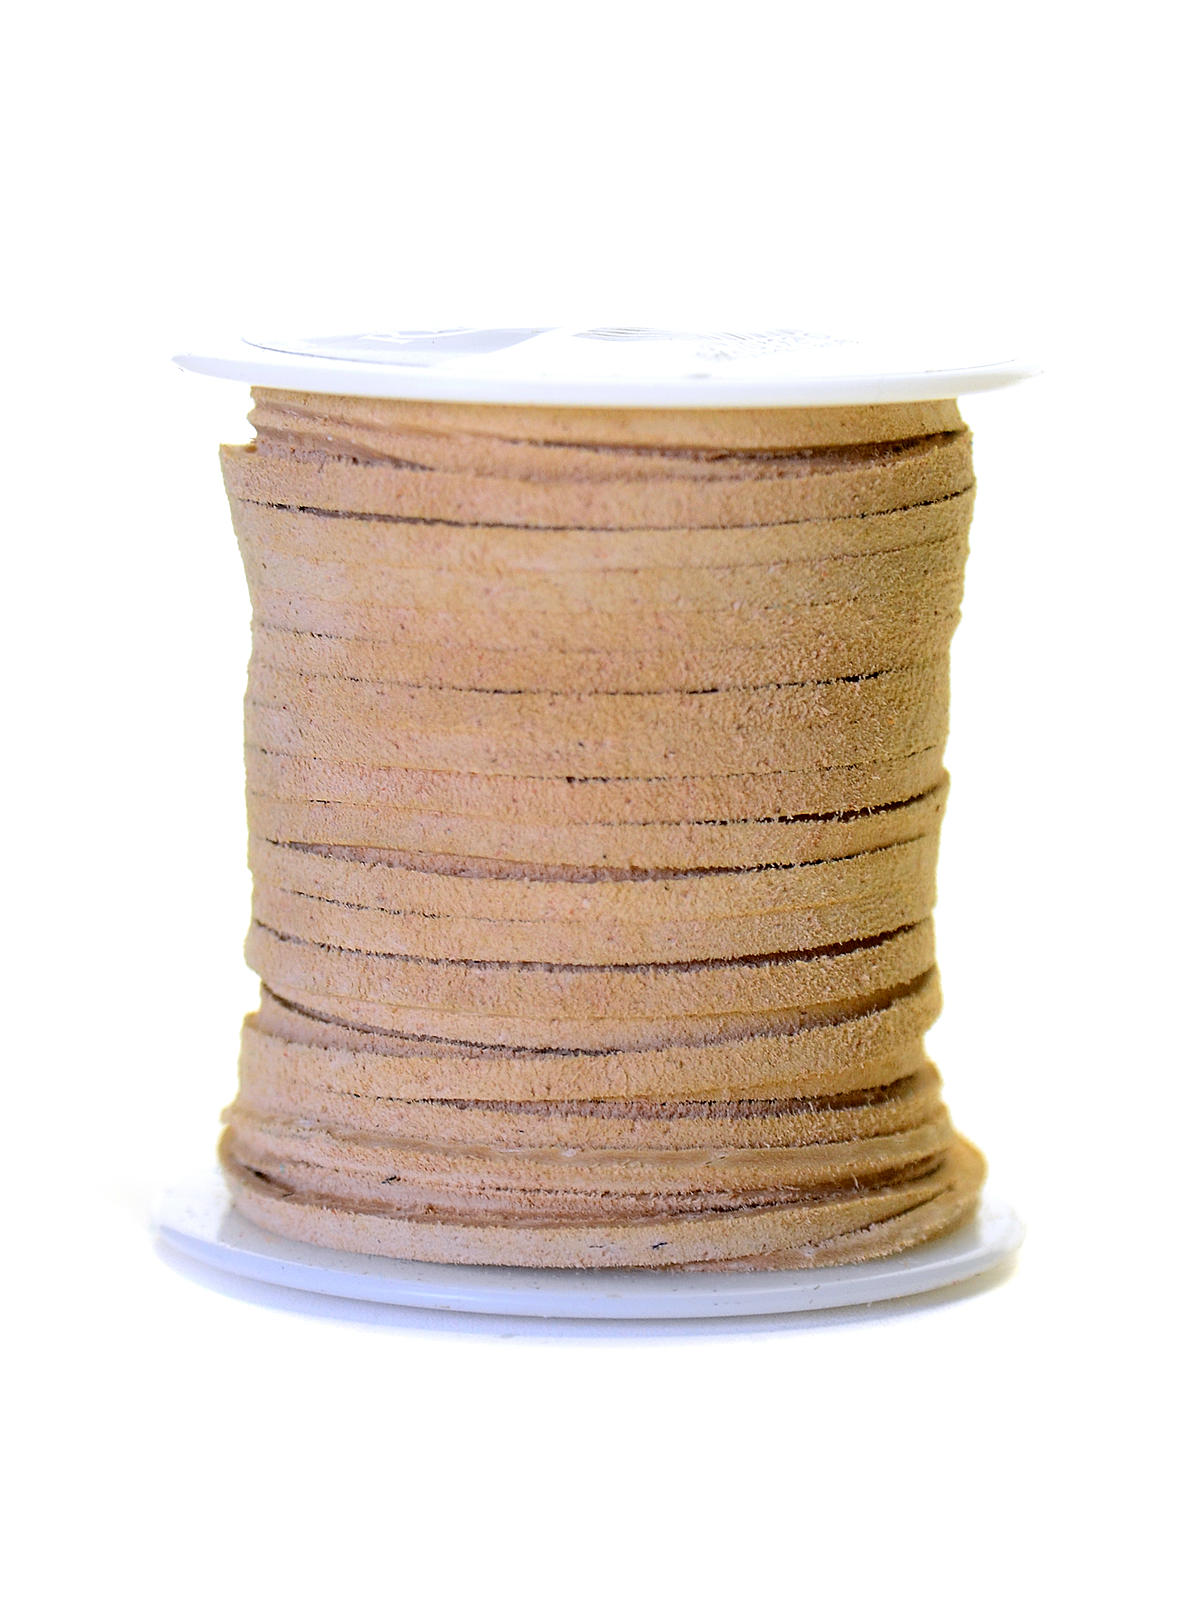 Realeather Sof-suede Lace Spool 3 32 In. X 50 Ft. Sandy Beach